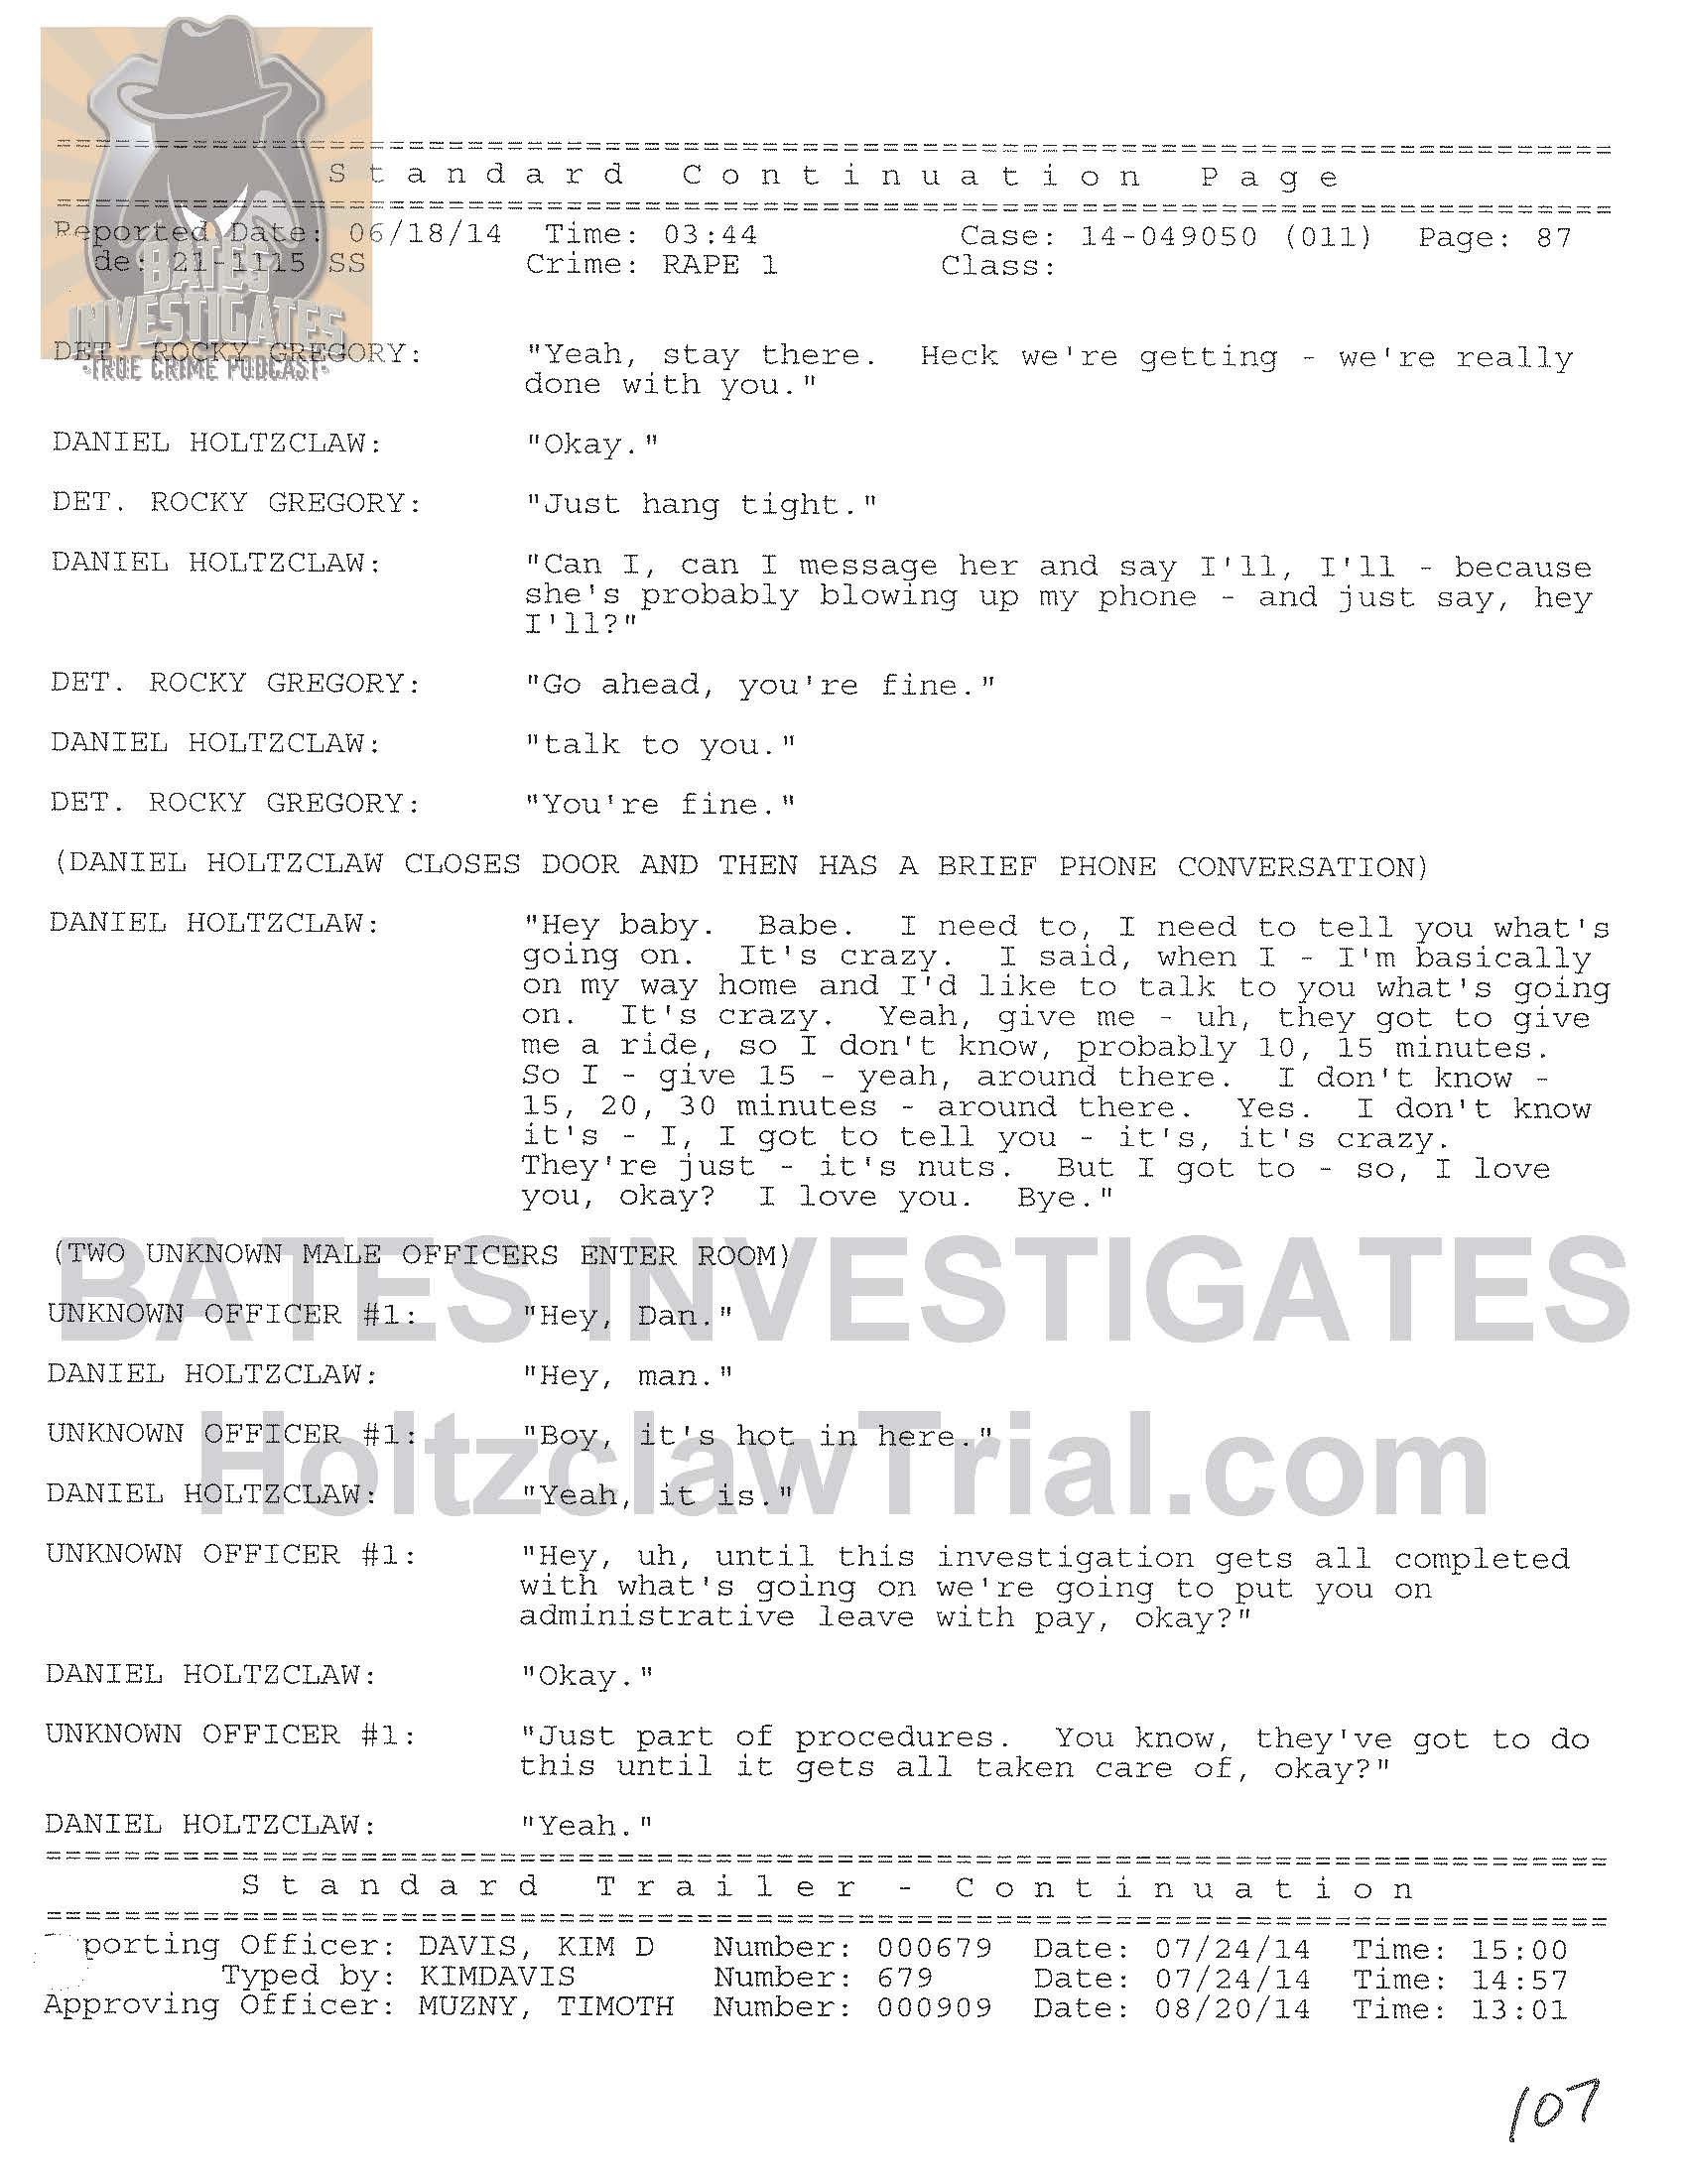 Holtzclaw Interrogation Transcript - Ep02 Redacted_Page_87.jpg